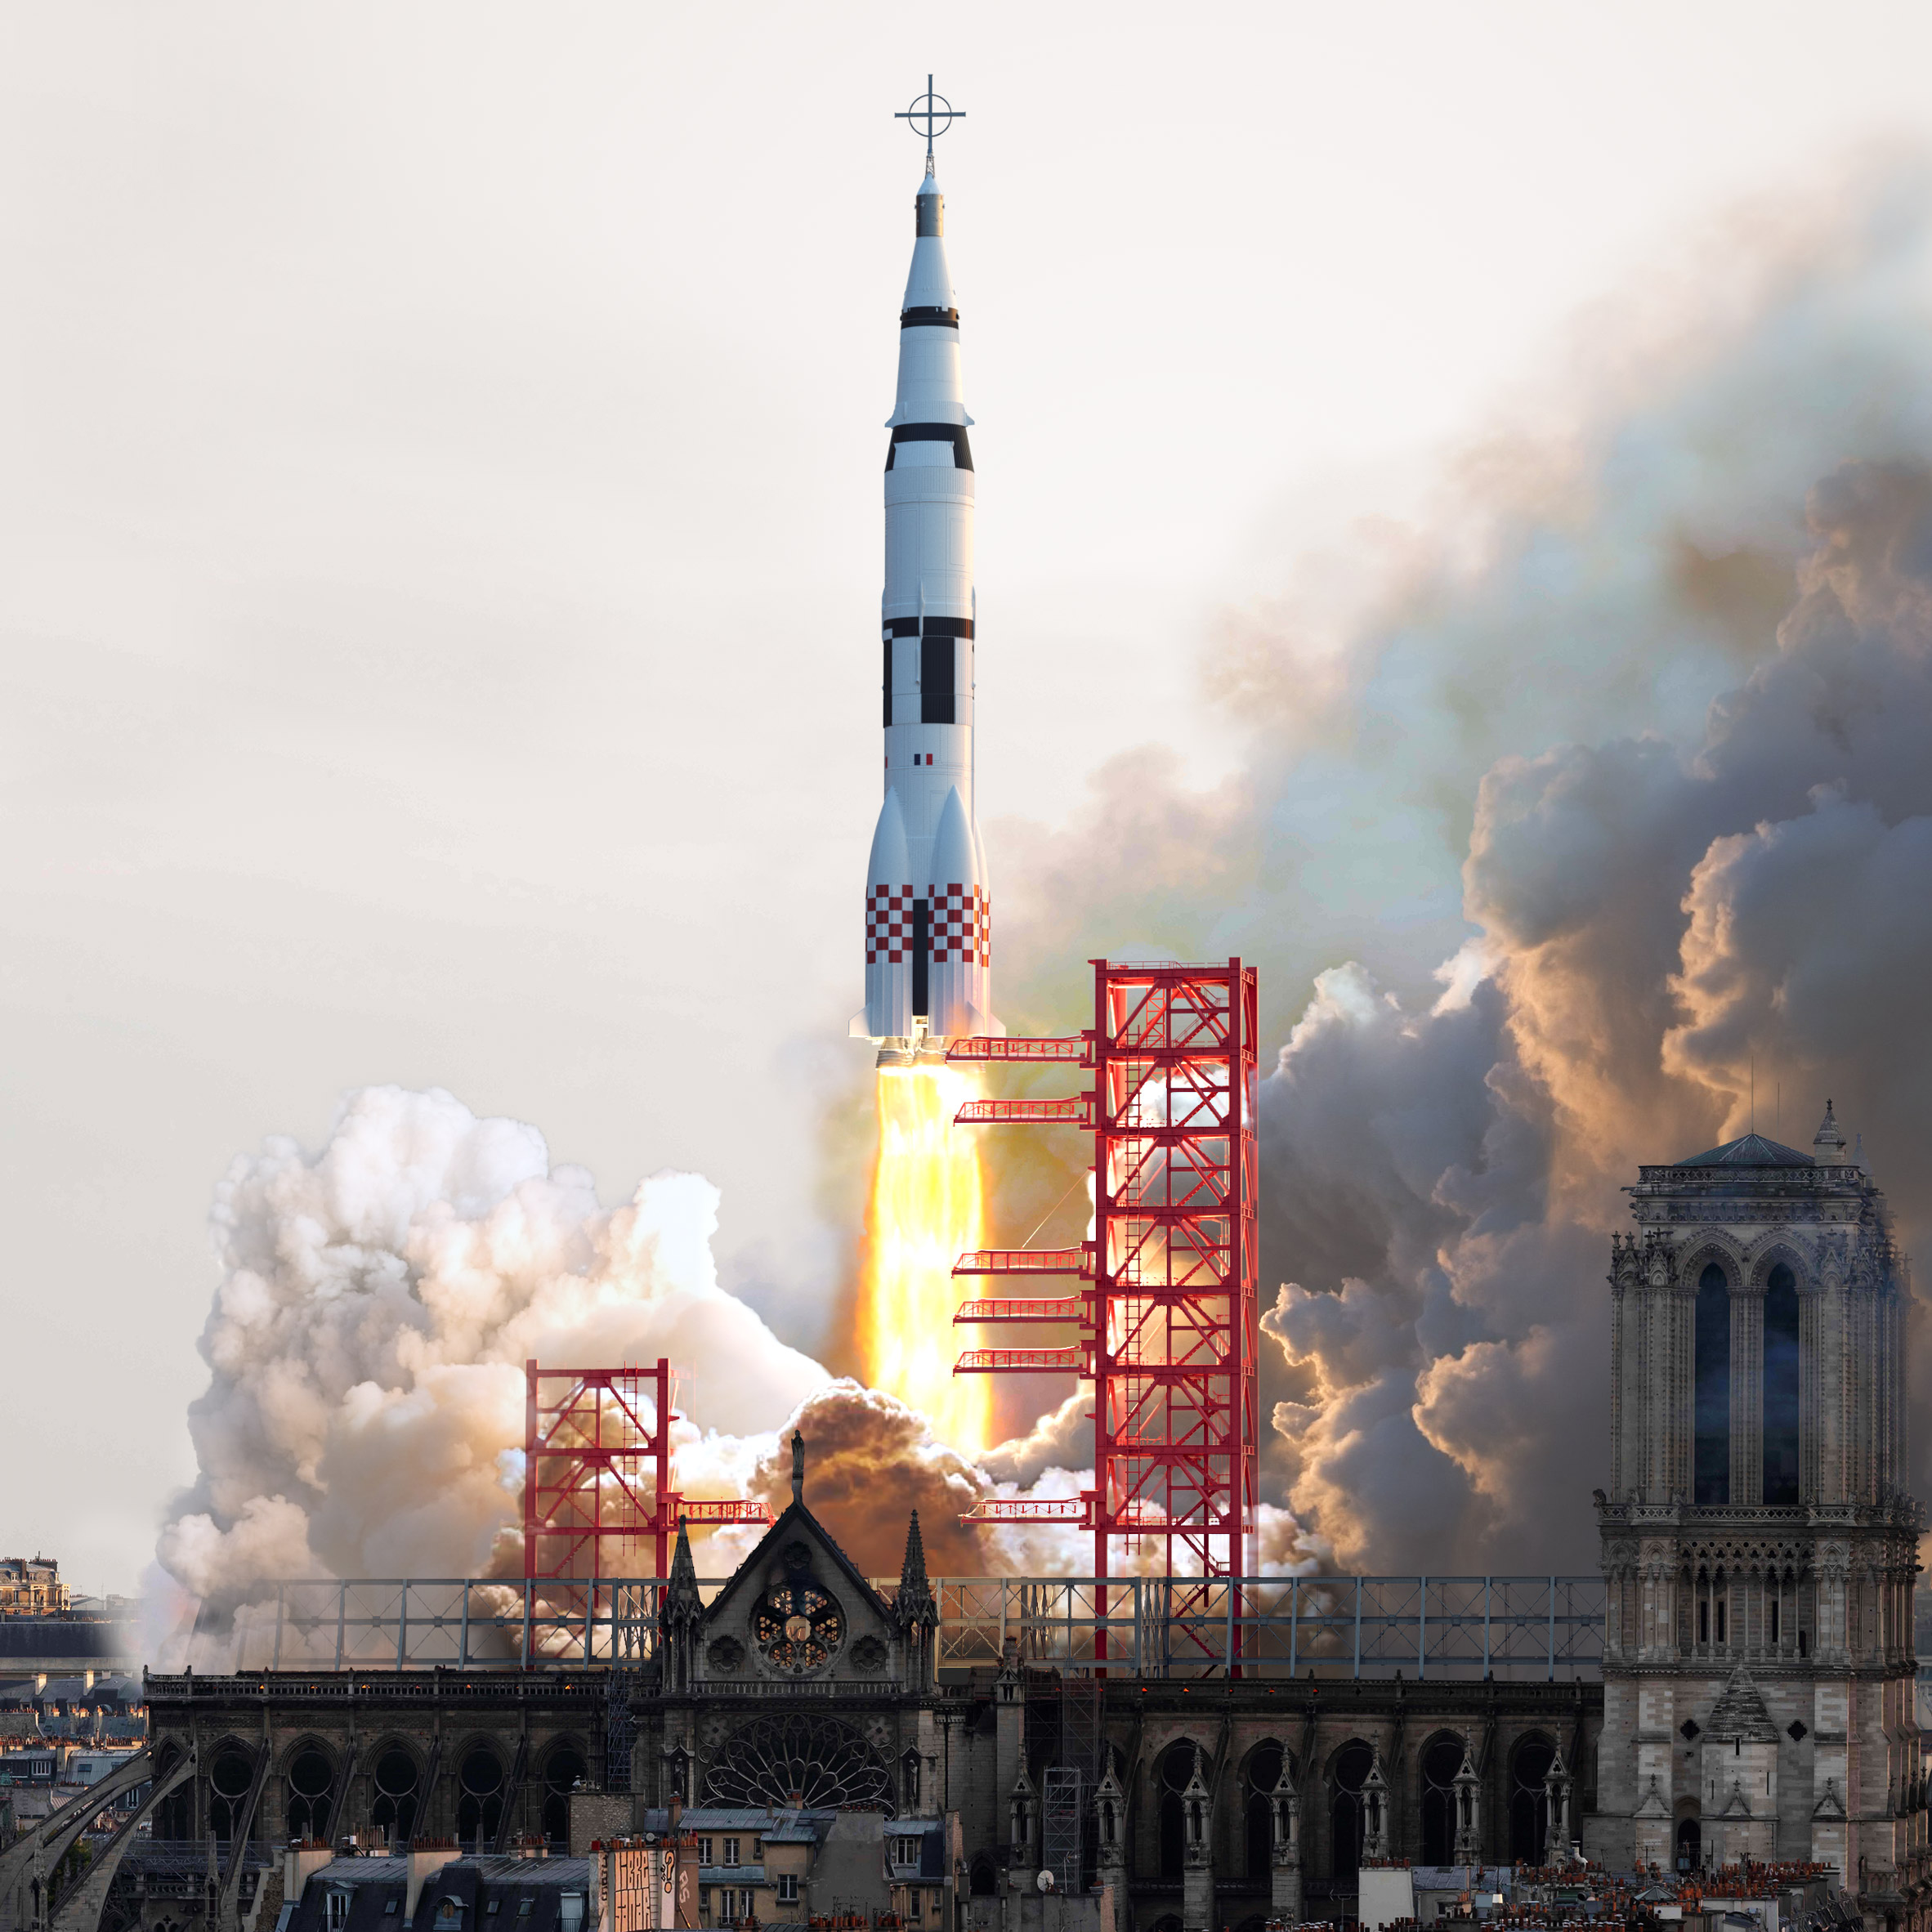 Designer Sebastian Errazuriz has designed a space rocket launch pad for Notre-Dame in an "act of creative one-upmanship" to demand an end to architects' proposals